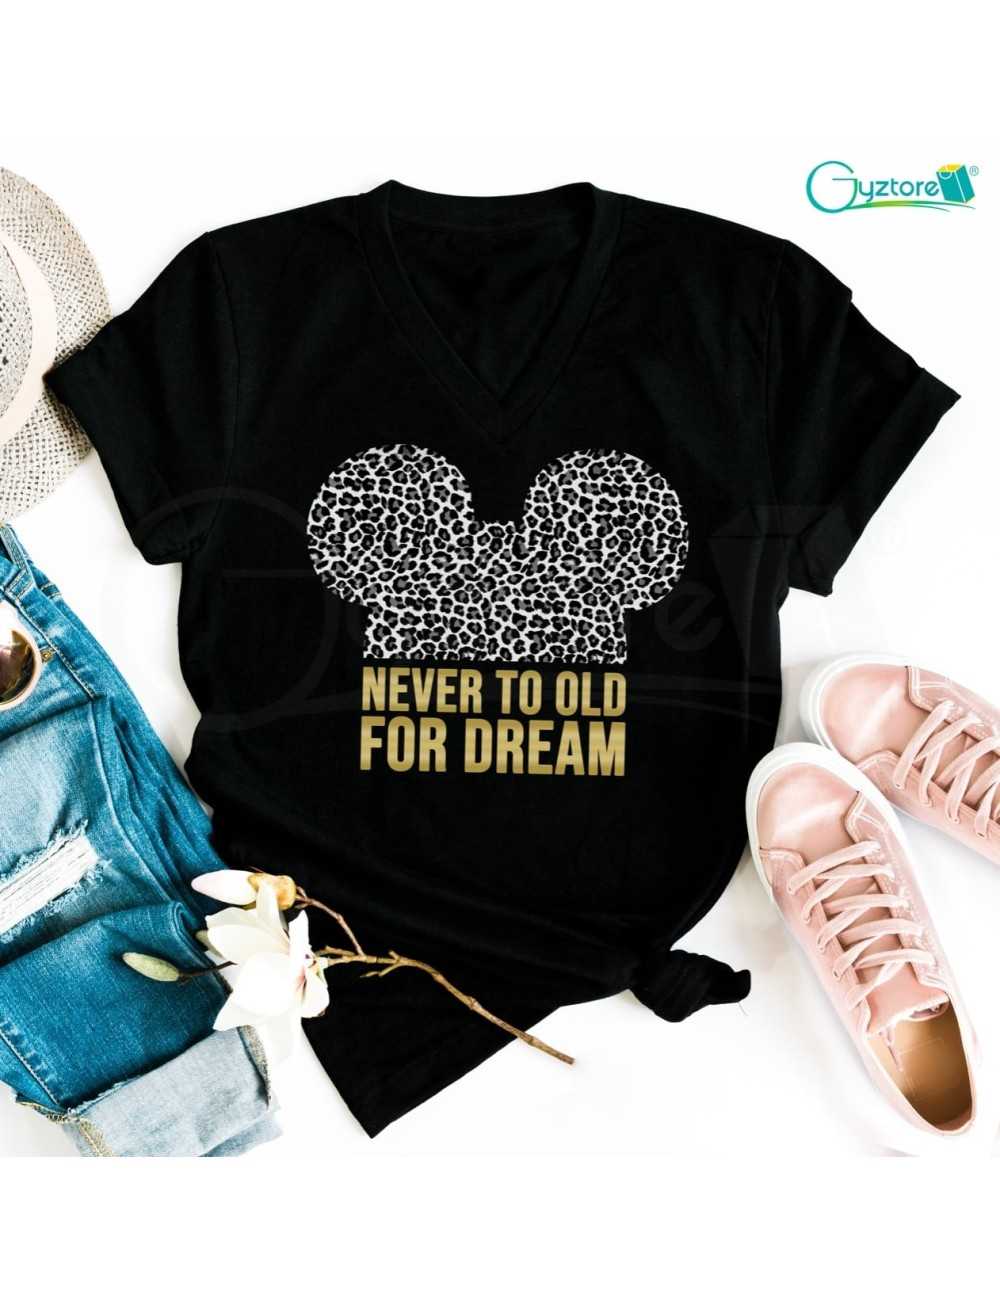 Camisetas Mickey “Never too old for dream”